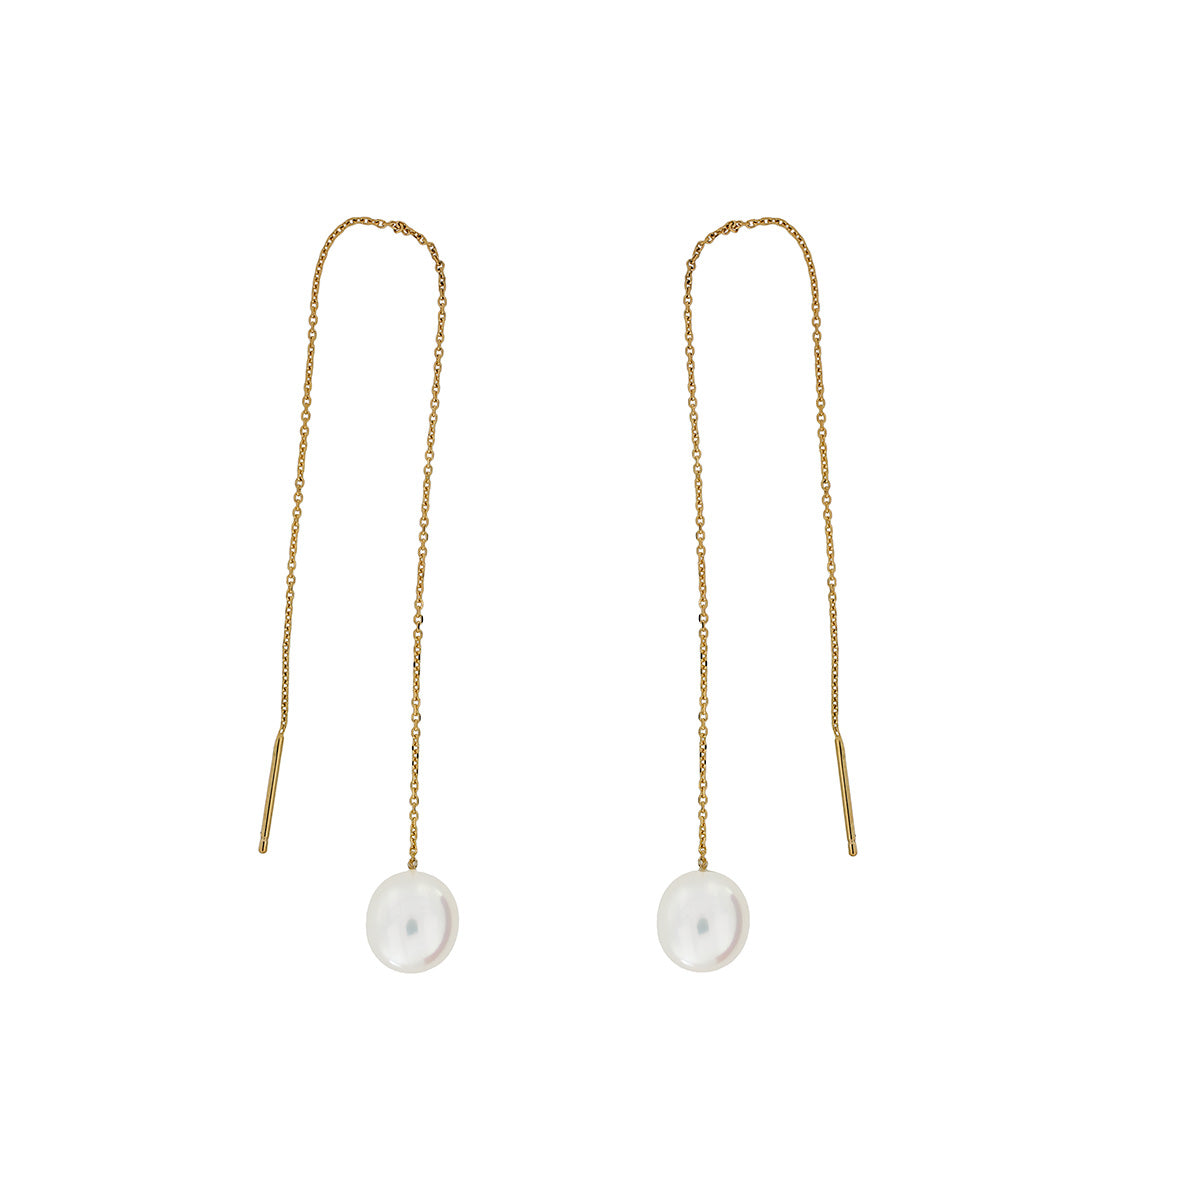 9 Carat Yellow Gold Oval Pearl Pull-through Earrings